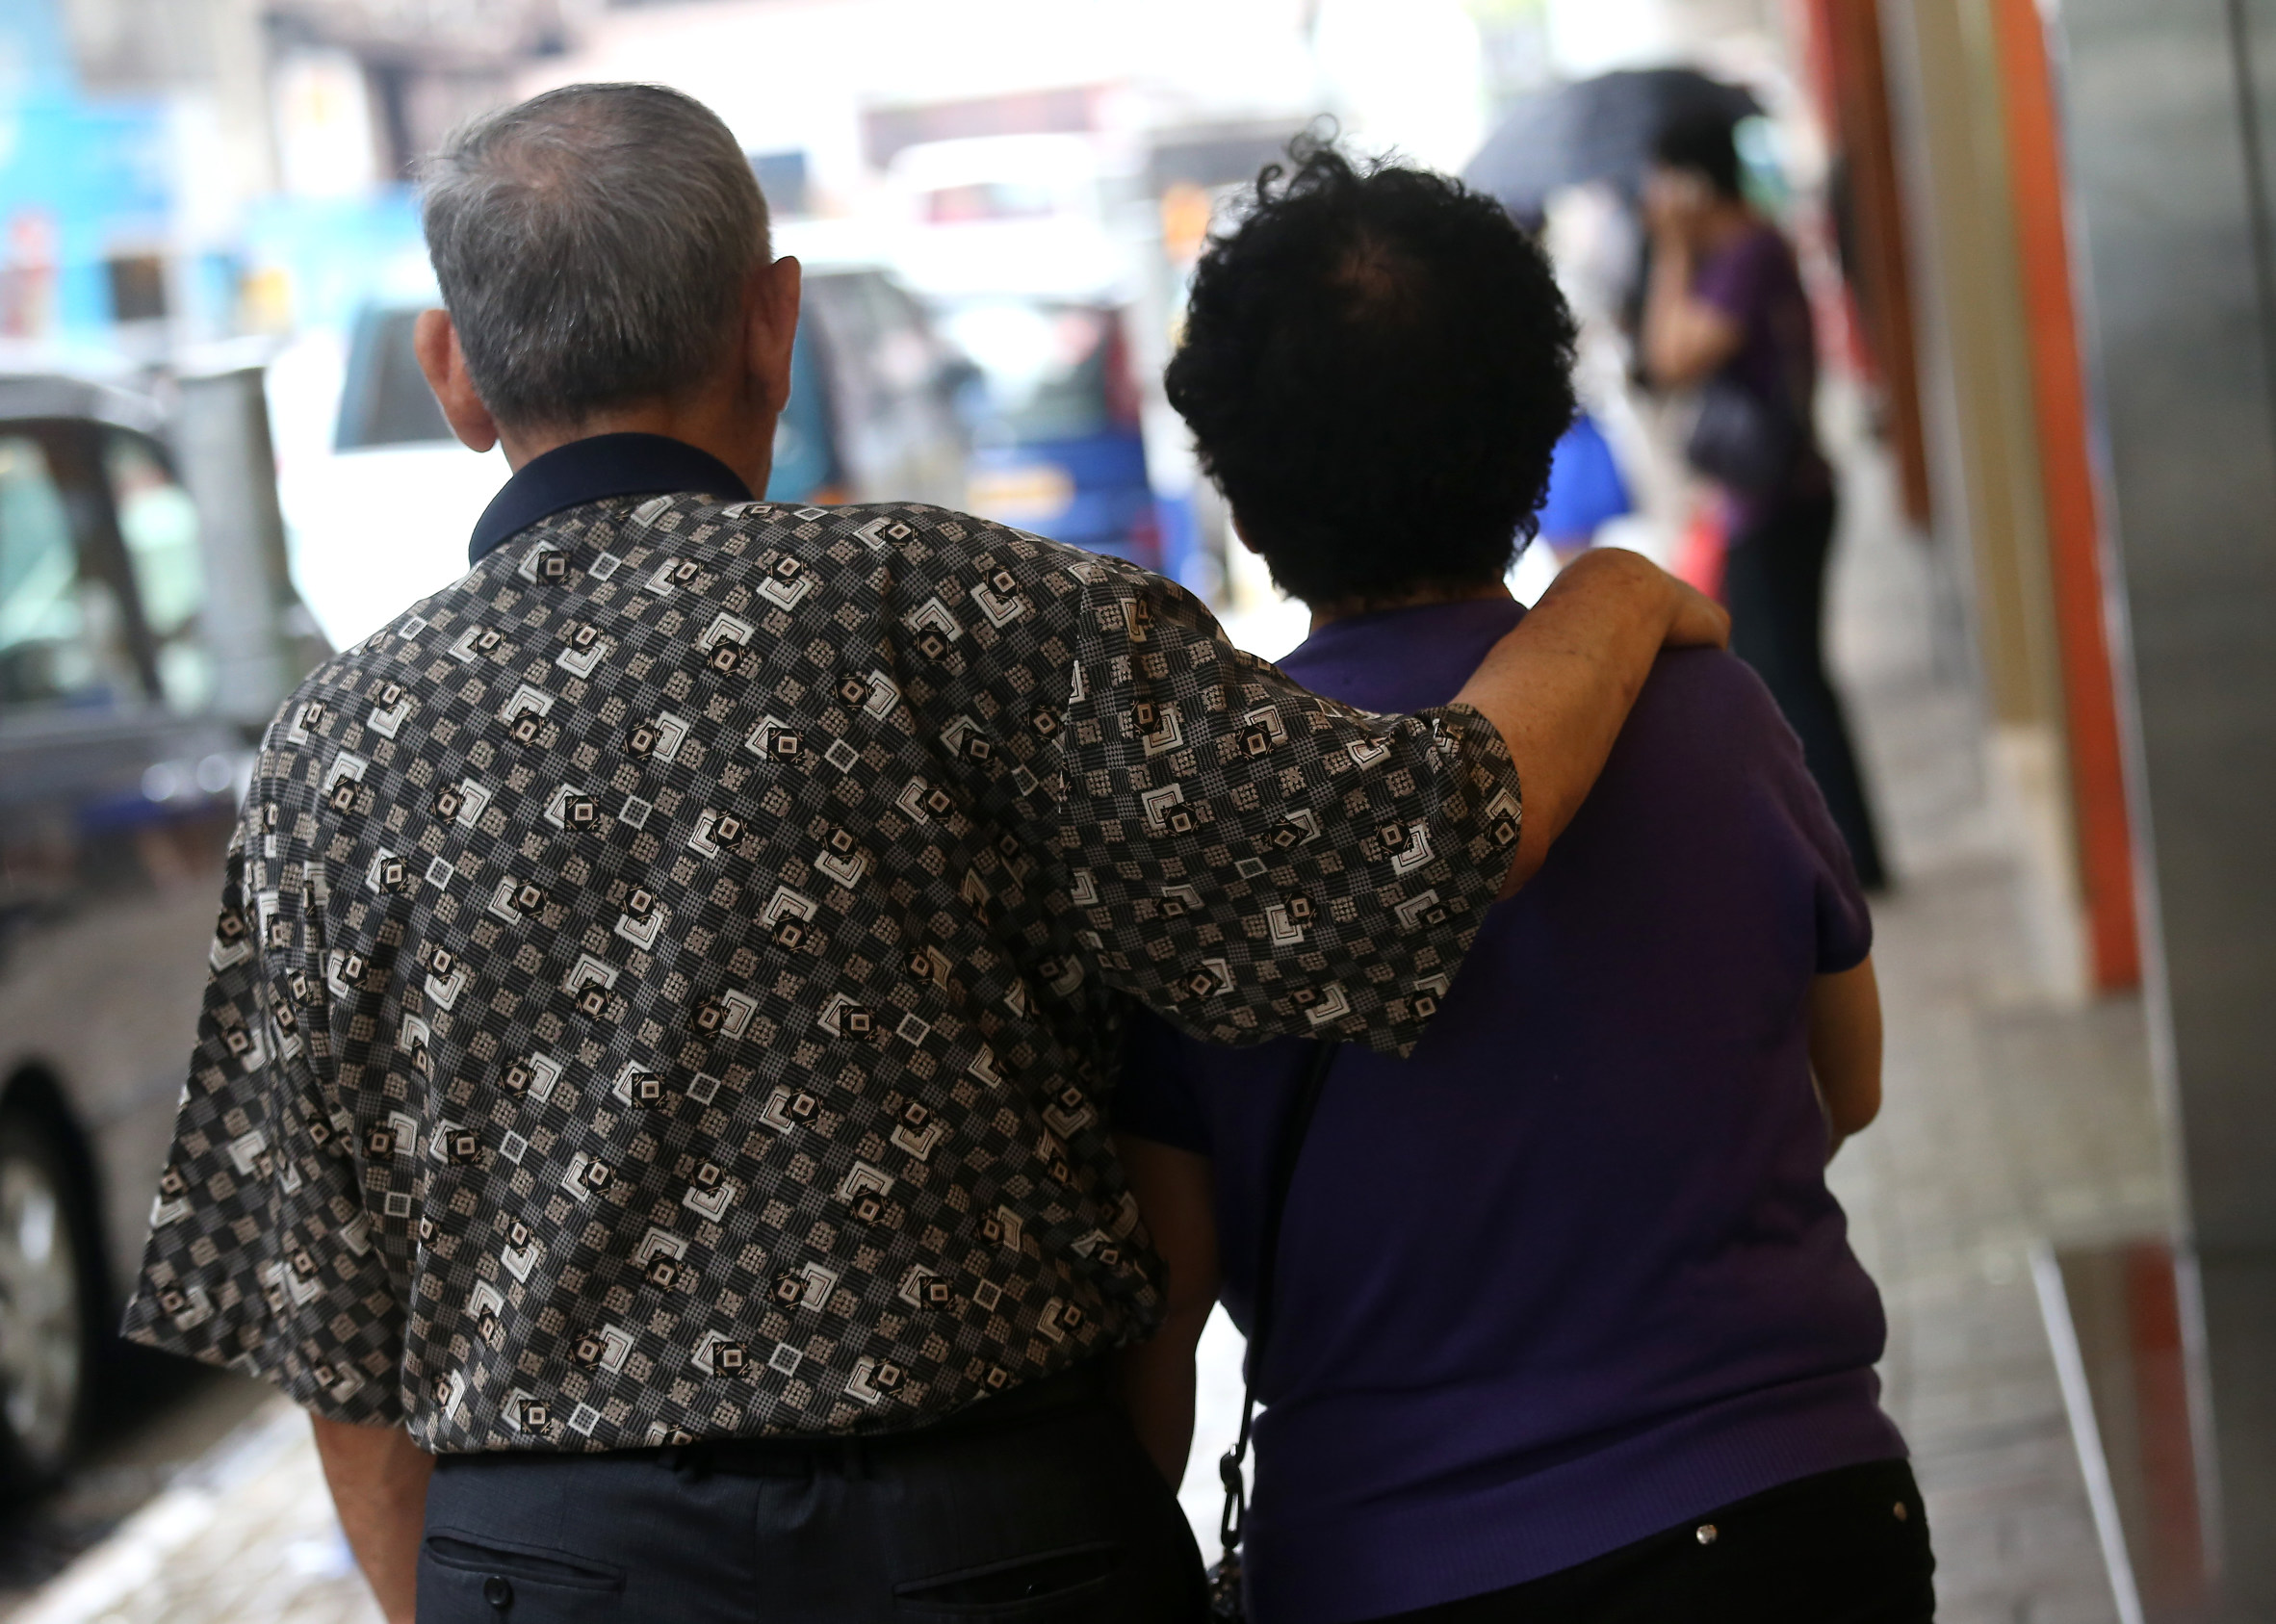 The ageing population and decades of low fertility will lead to a shrinking workforce after 2018. Photo: K. Y. Cheng